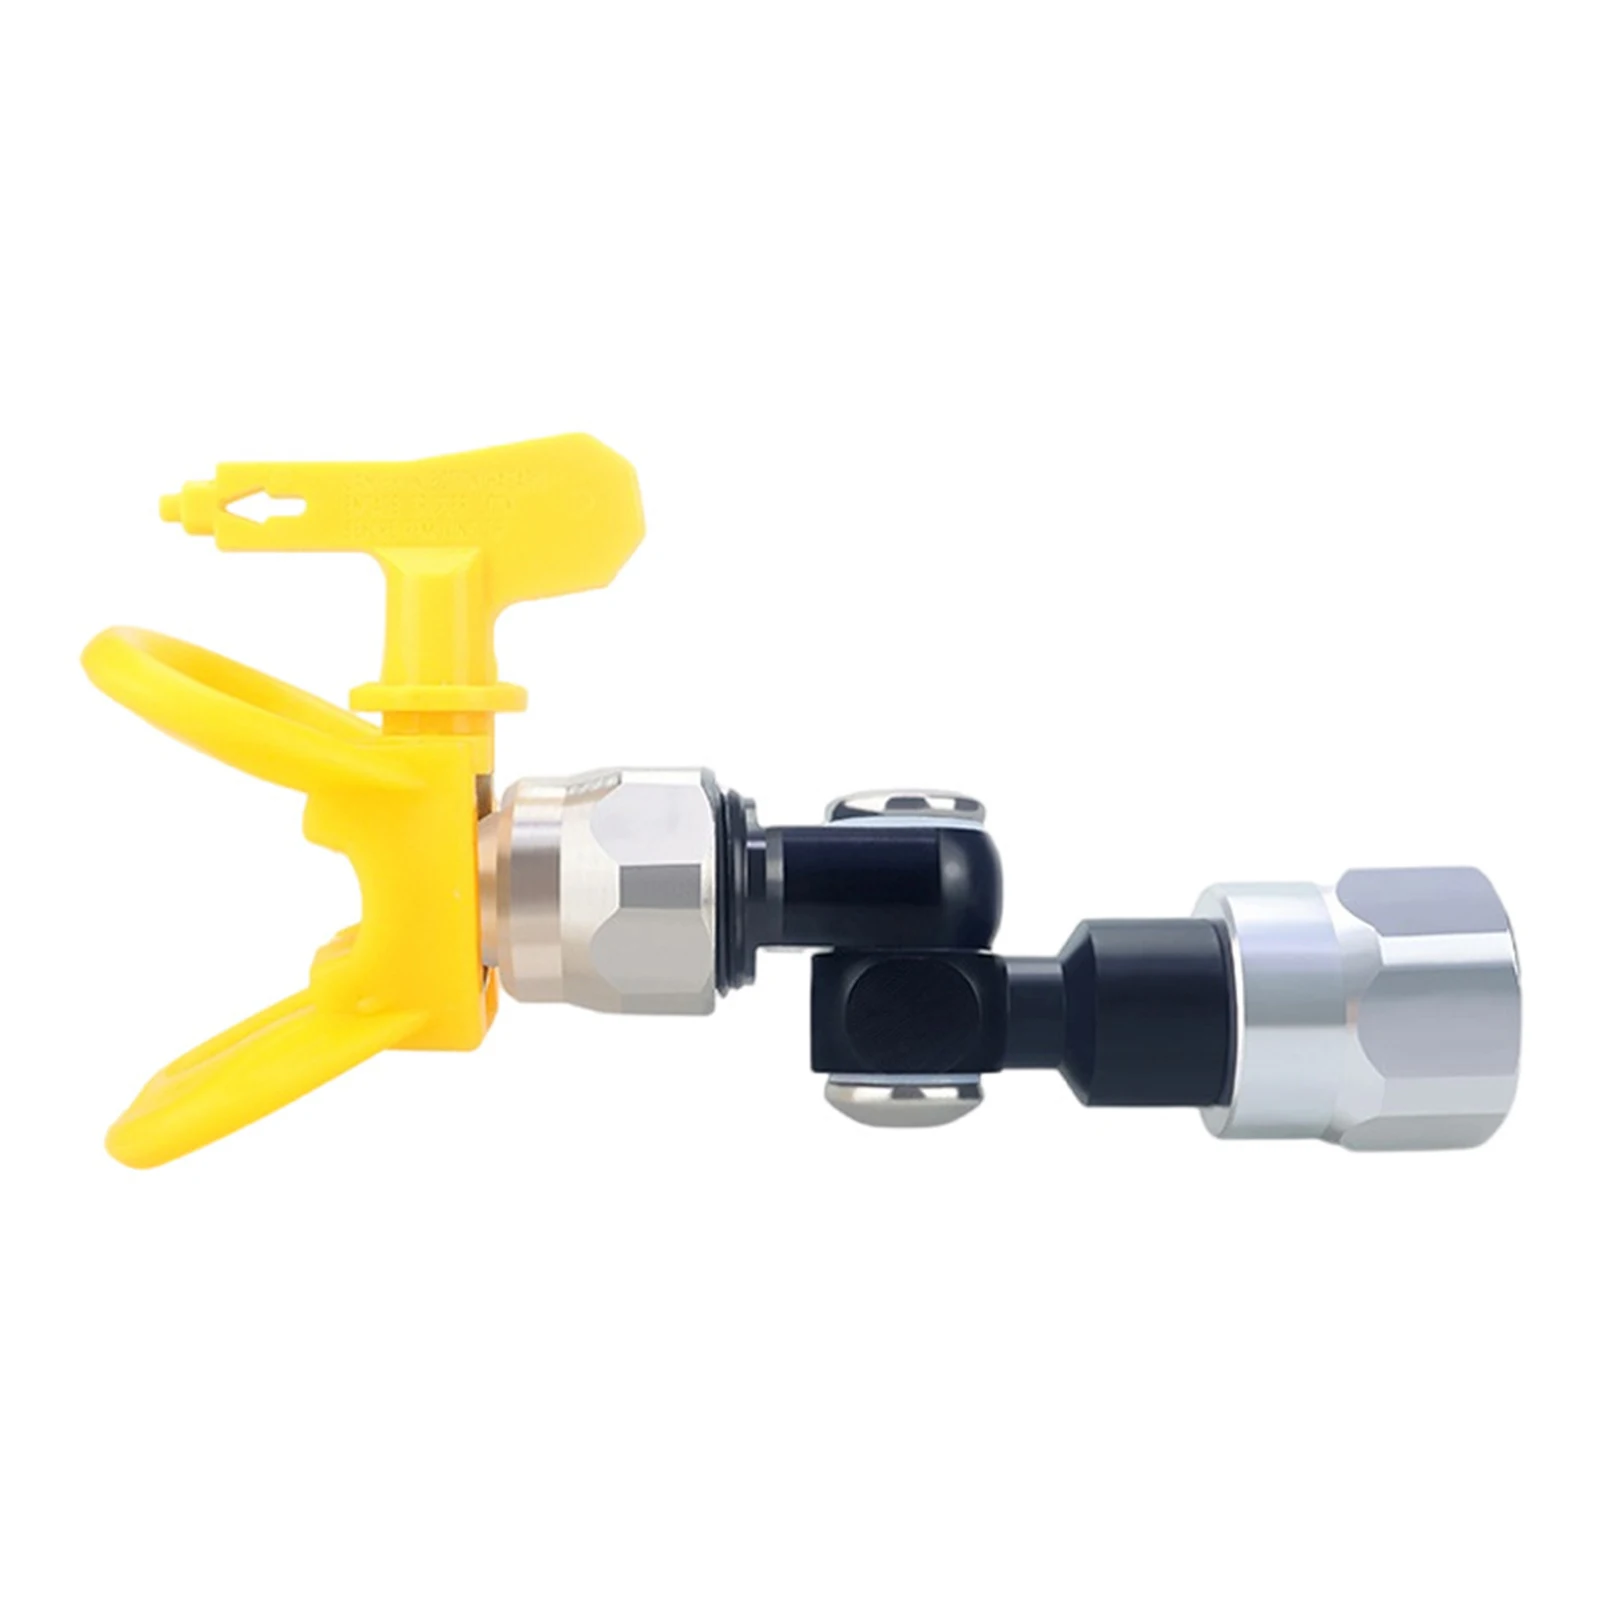 

Nozzle Holder Universal Joint Airless Sprayer With Sealing Gasket Flexible Alloy Easy To Install Extension Rod Rotate 360°